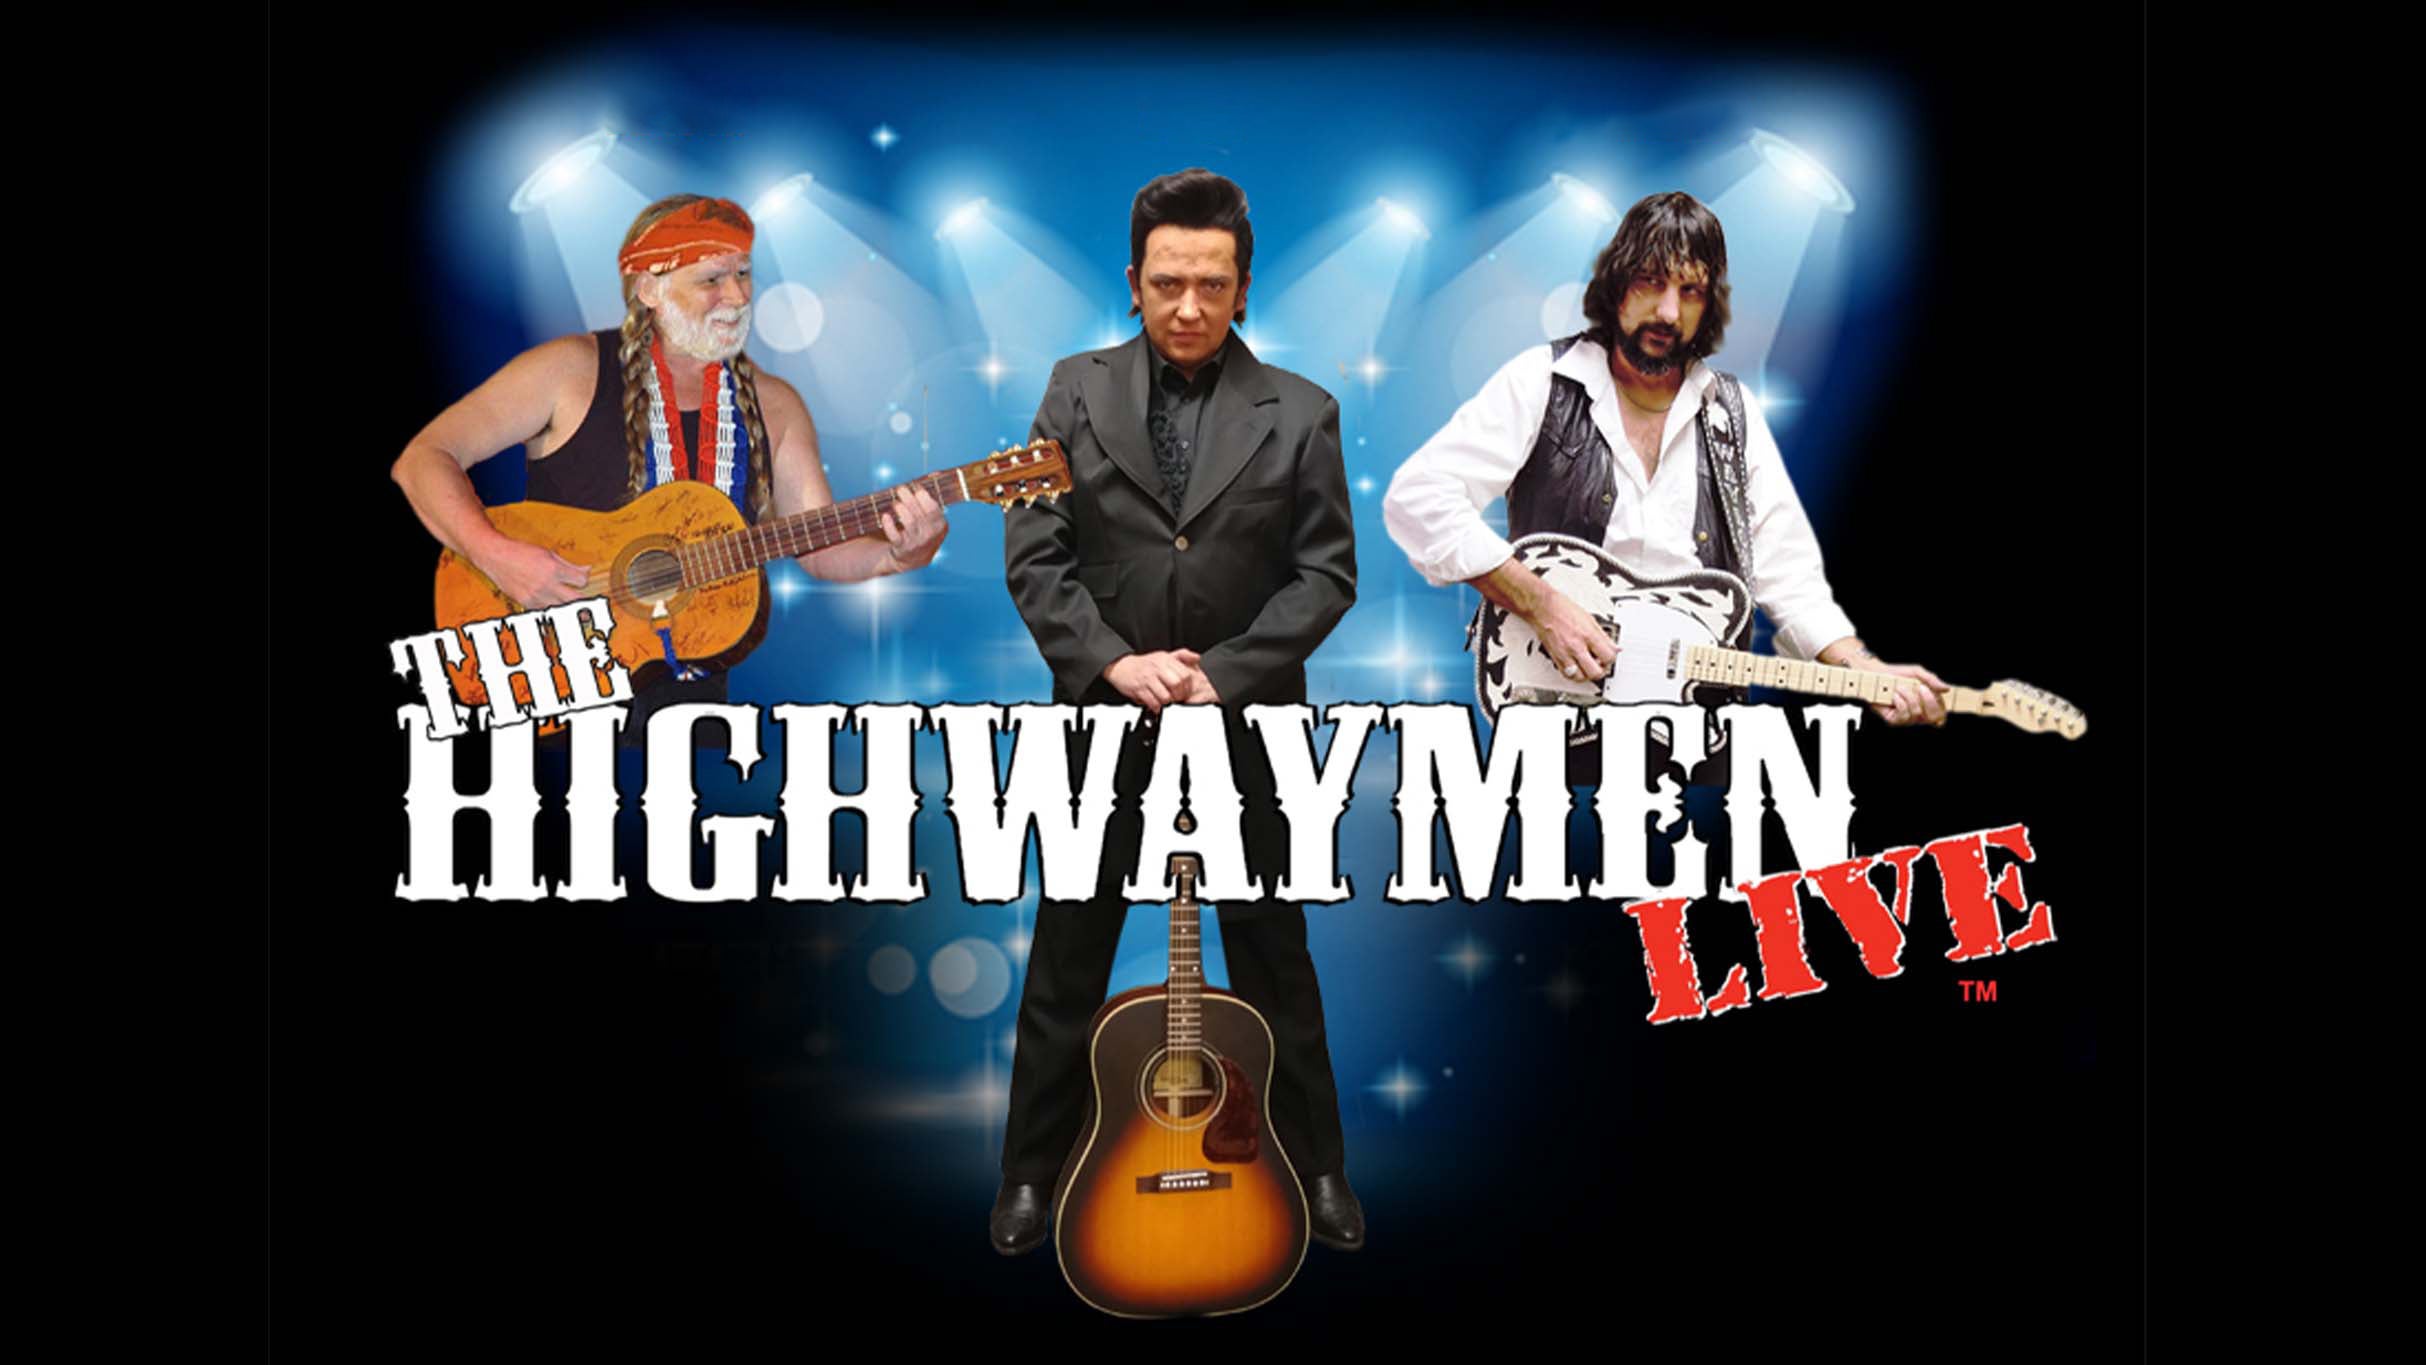 new presale code to The Highwaymen Live face value tickets in Florence